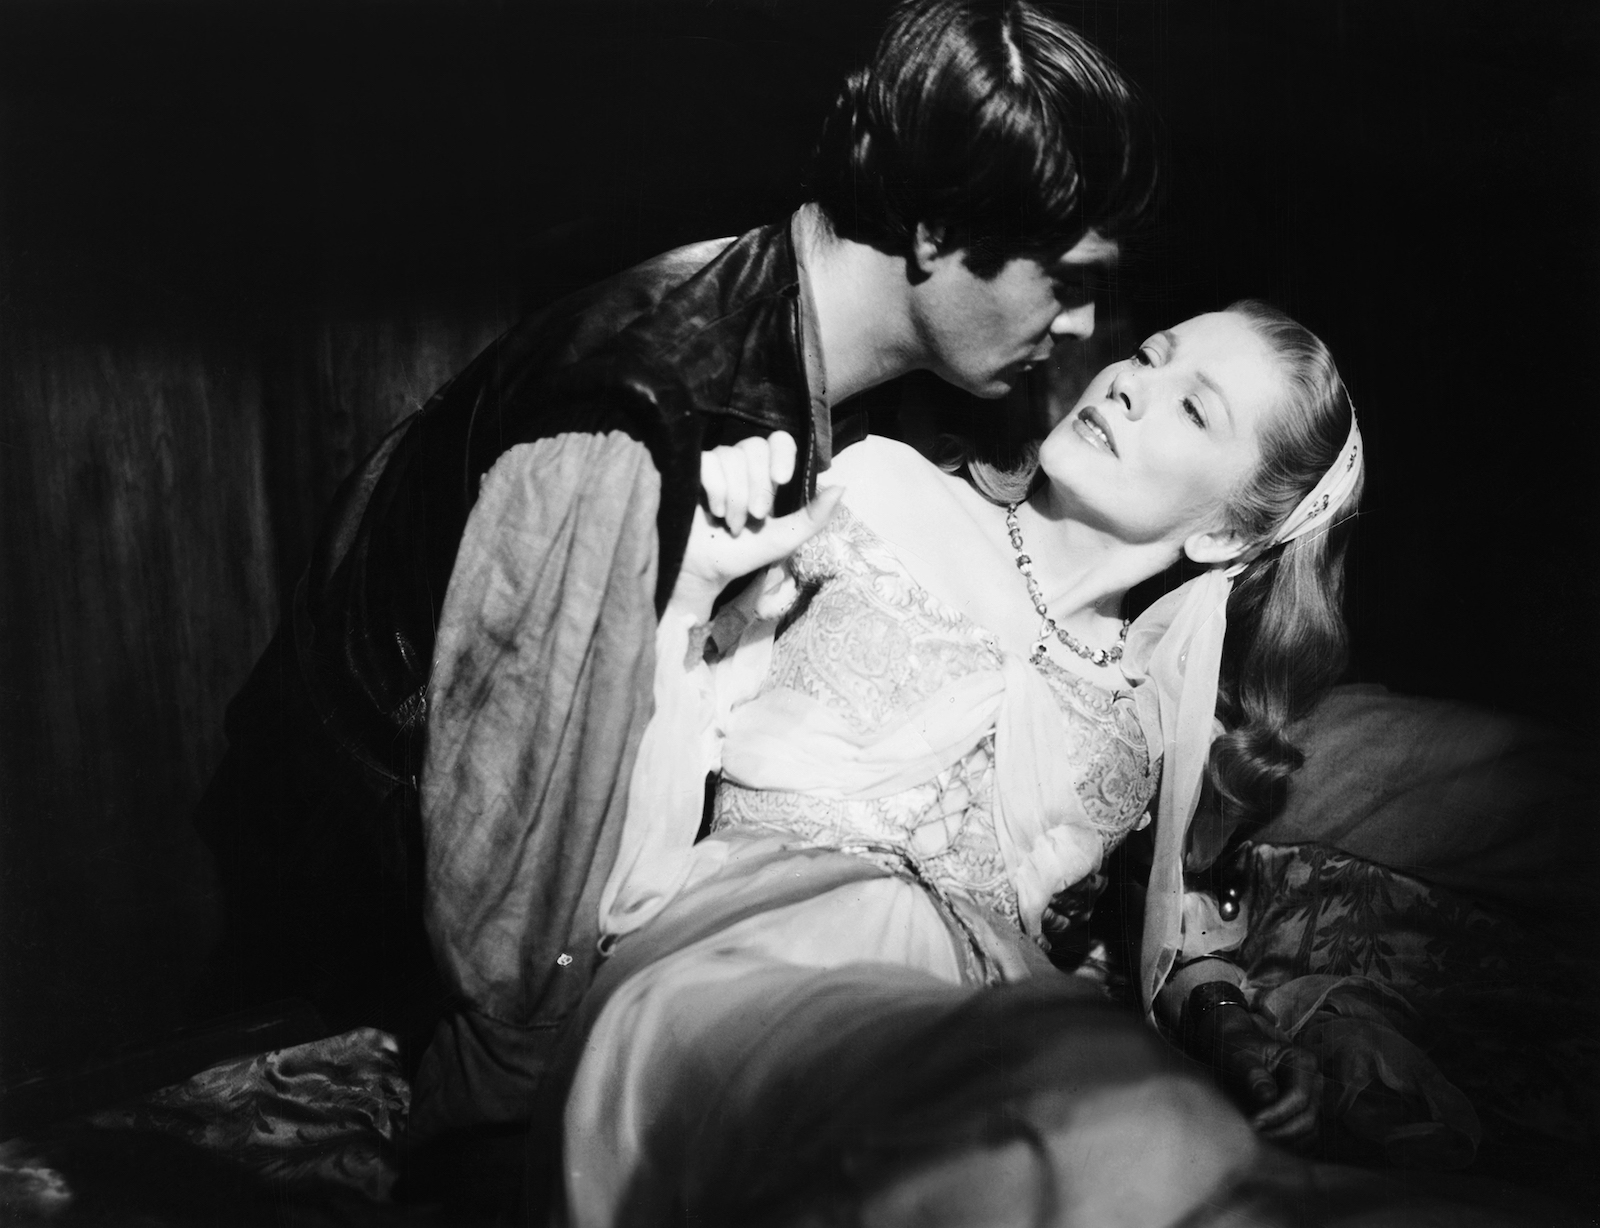 A black-and-white film still of a man and a woman about to kiss